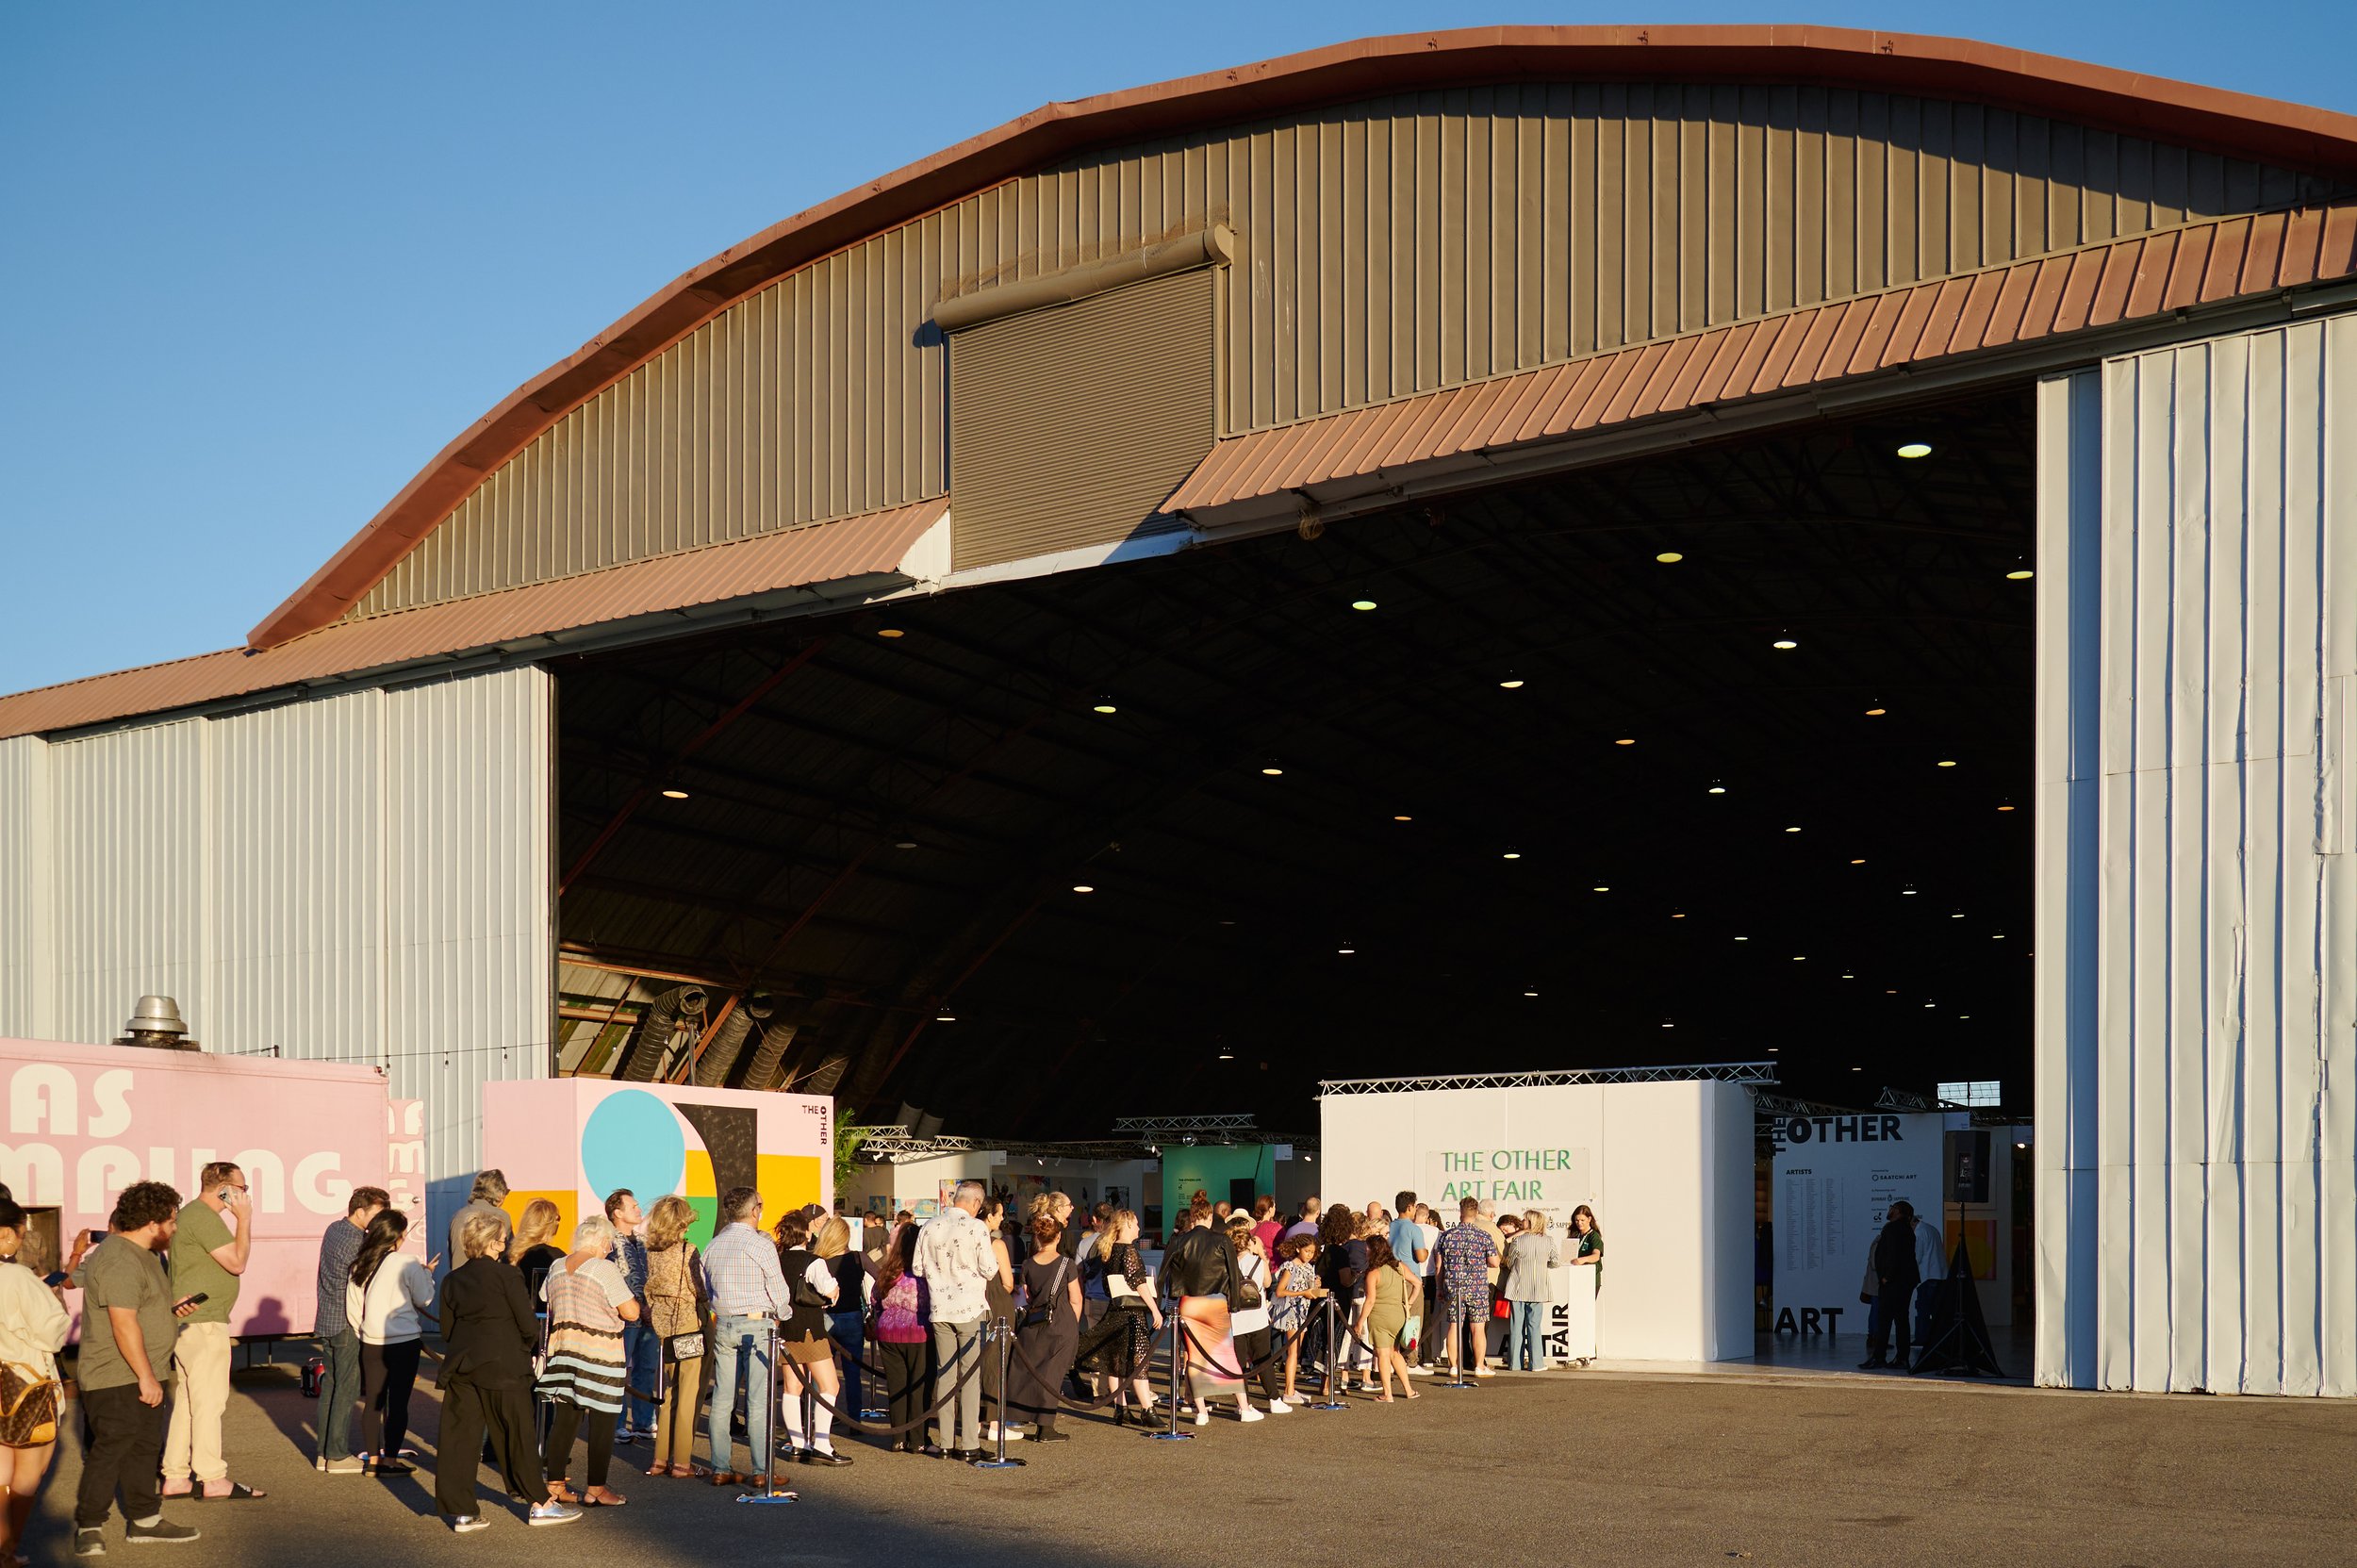  The entrance to The Other Art Fair with people lined up to get in on Thrusday, Sept. 22, 2022, at The Barker Hangar in Santa Monica, Calif. (Nicholas McCall | The Corsair) 